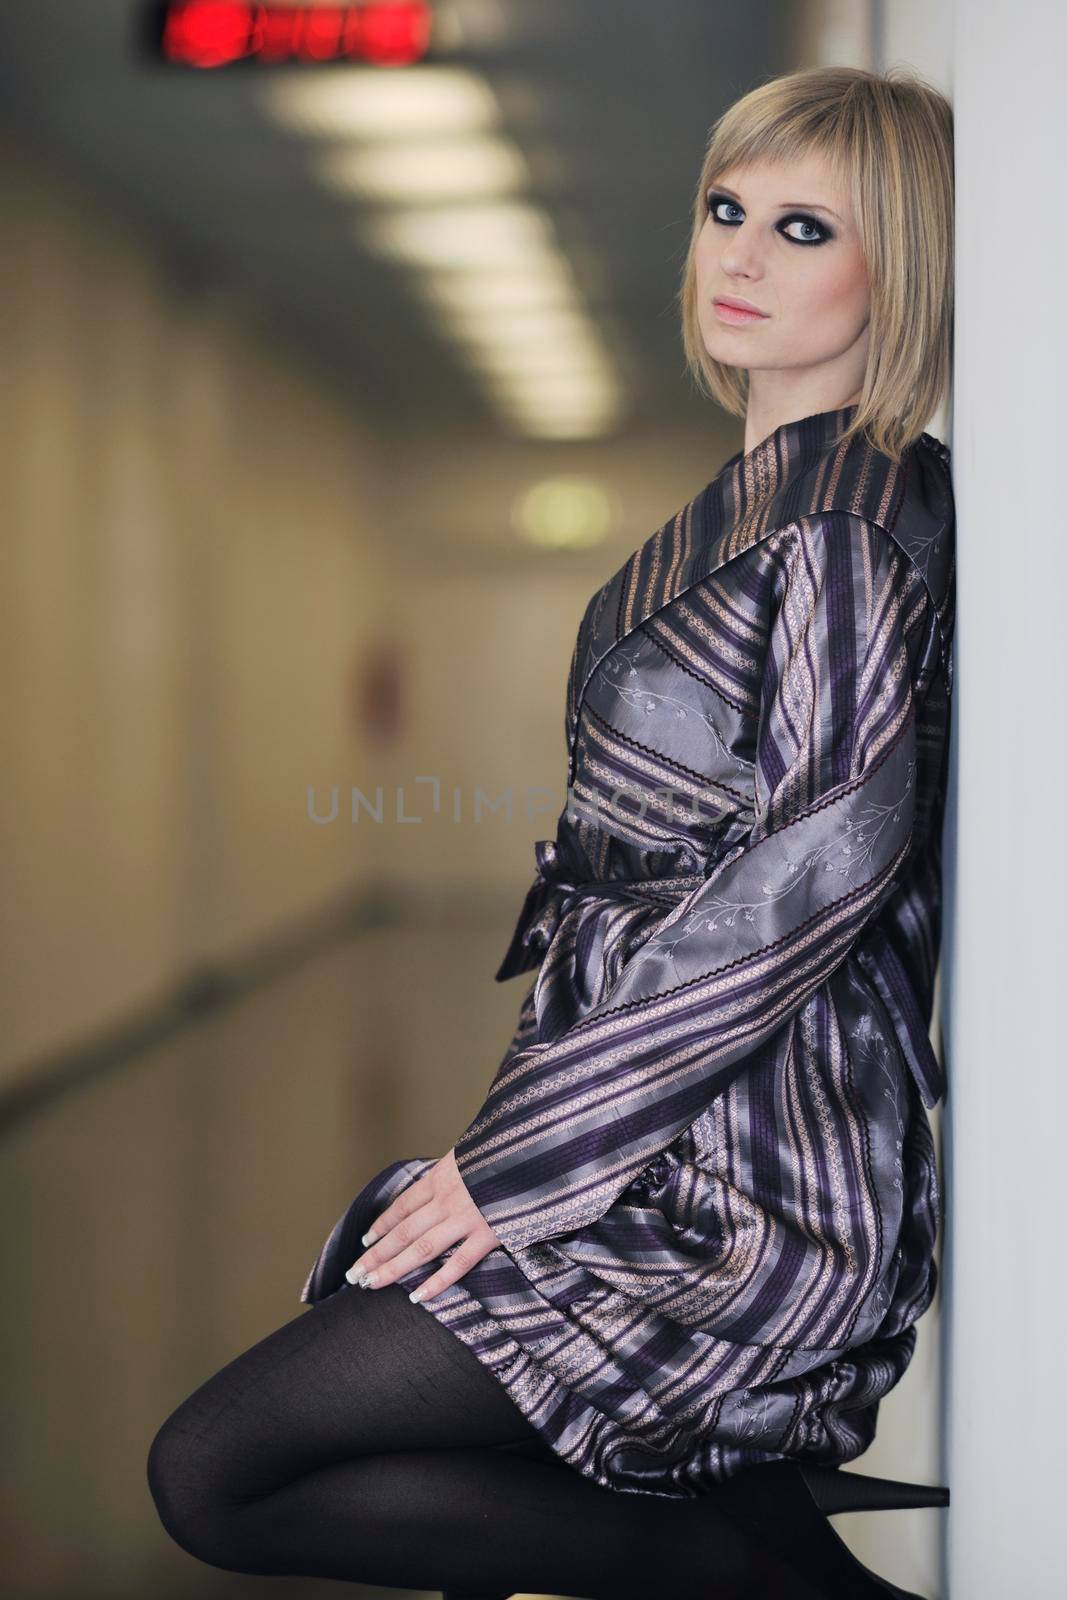 portrait of beautiful young woman with nice hairstyle and fashionable clothing and dress